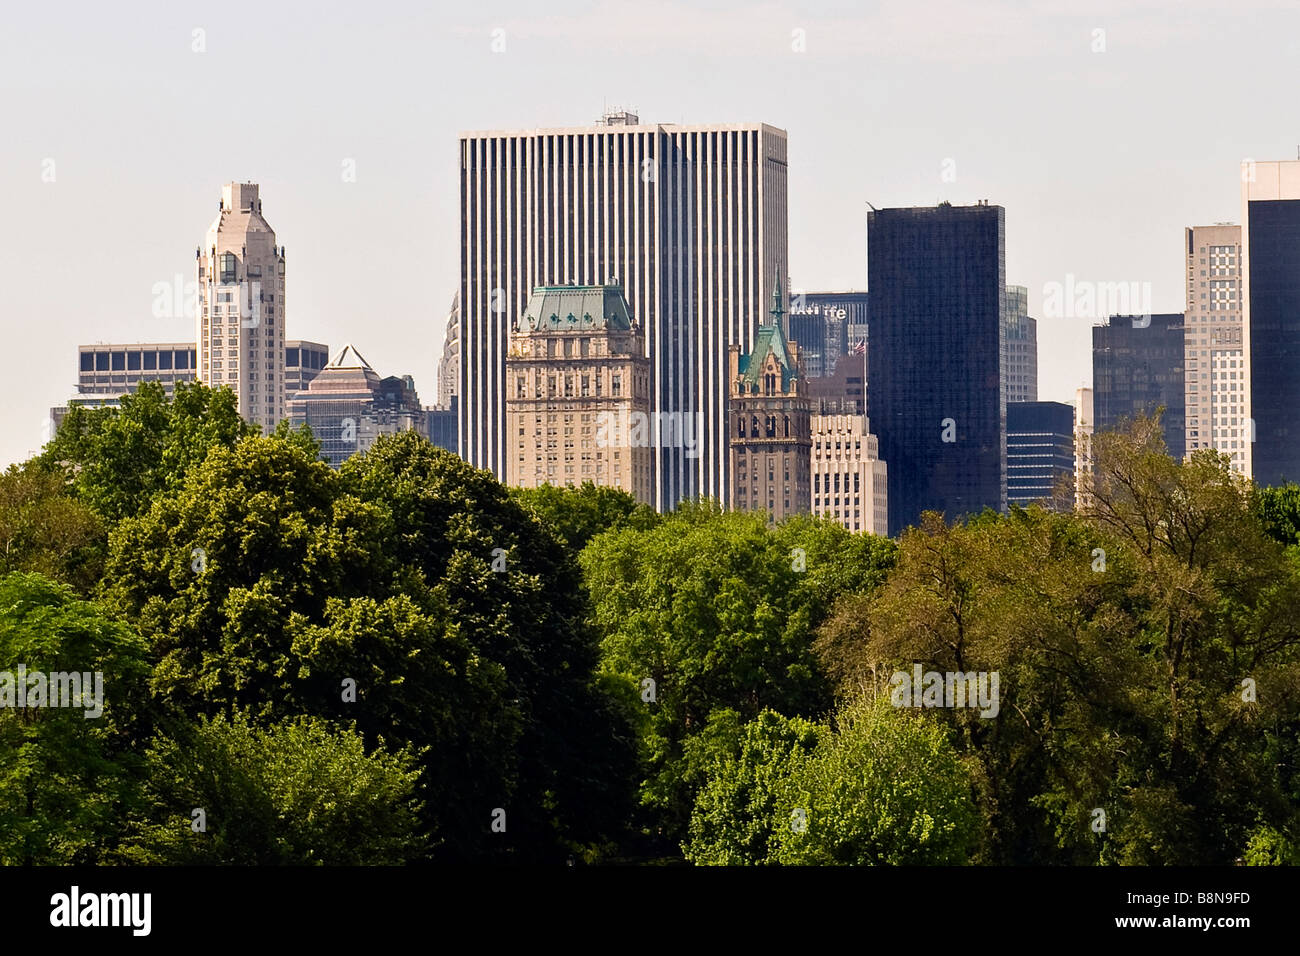 New York city skyline view from Central park Stock Photo